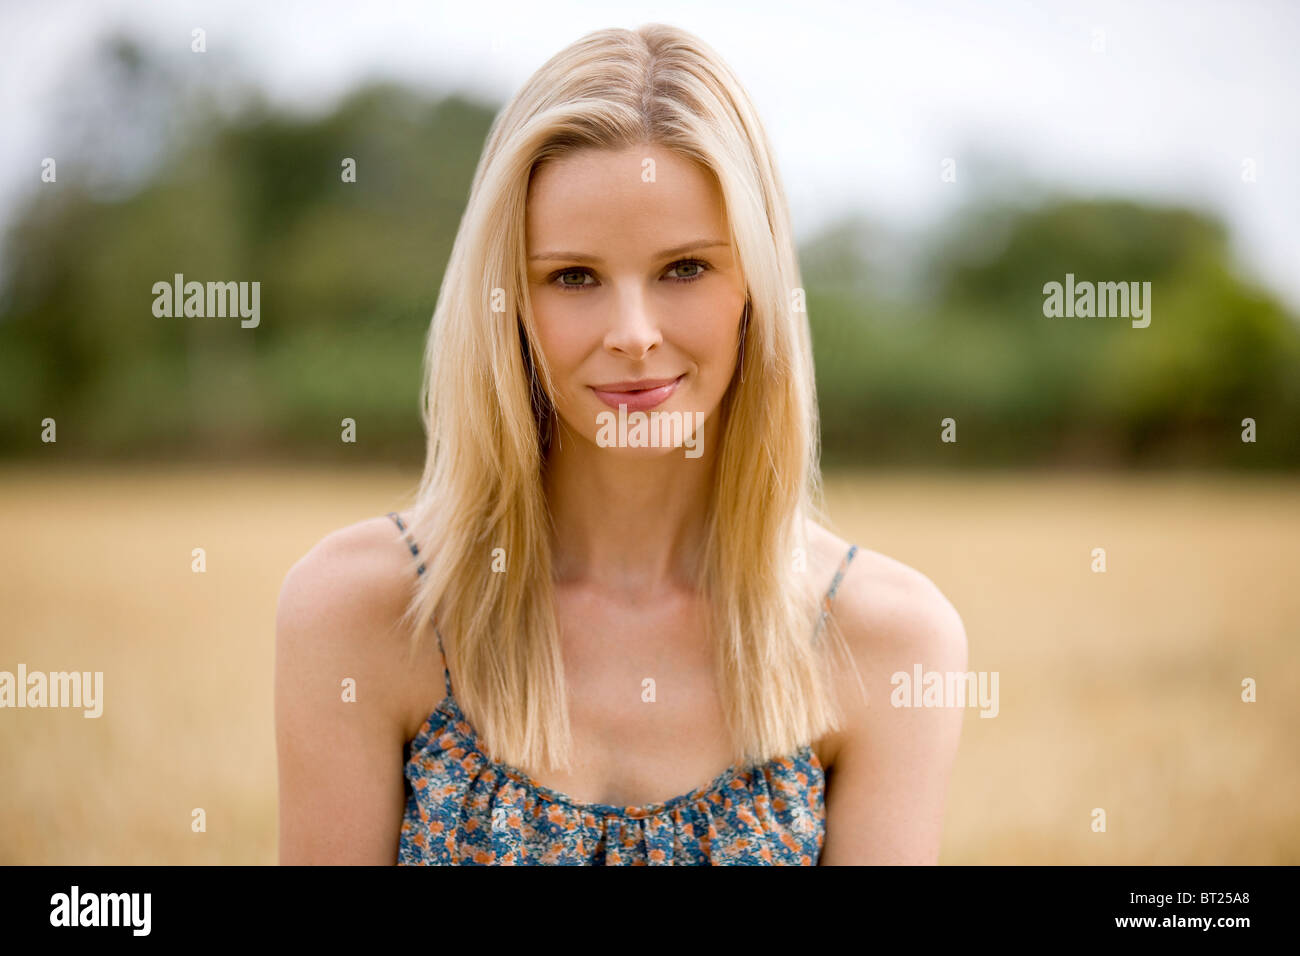 A portrait of a blonde haired woman in a wheatfield Stock Photo